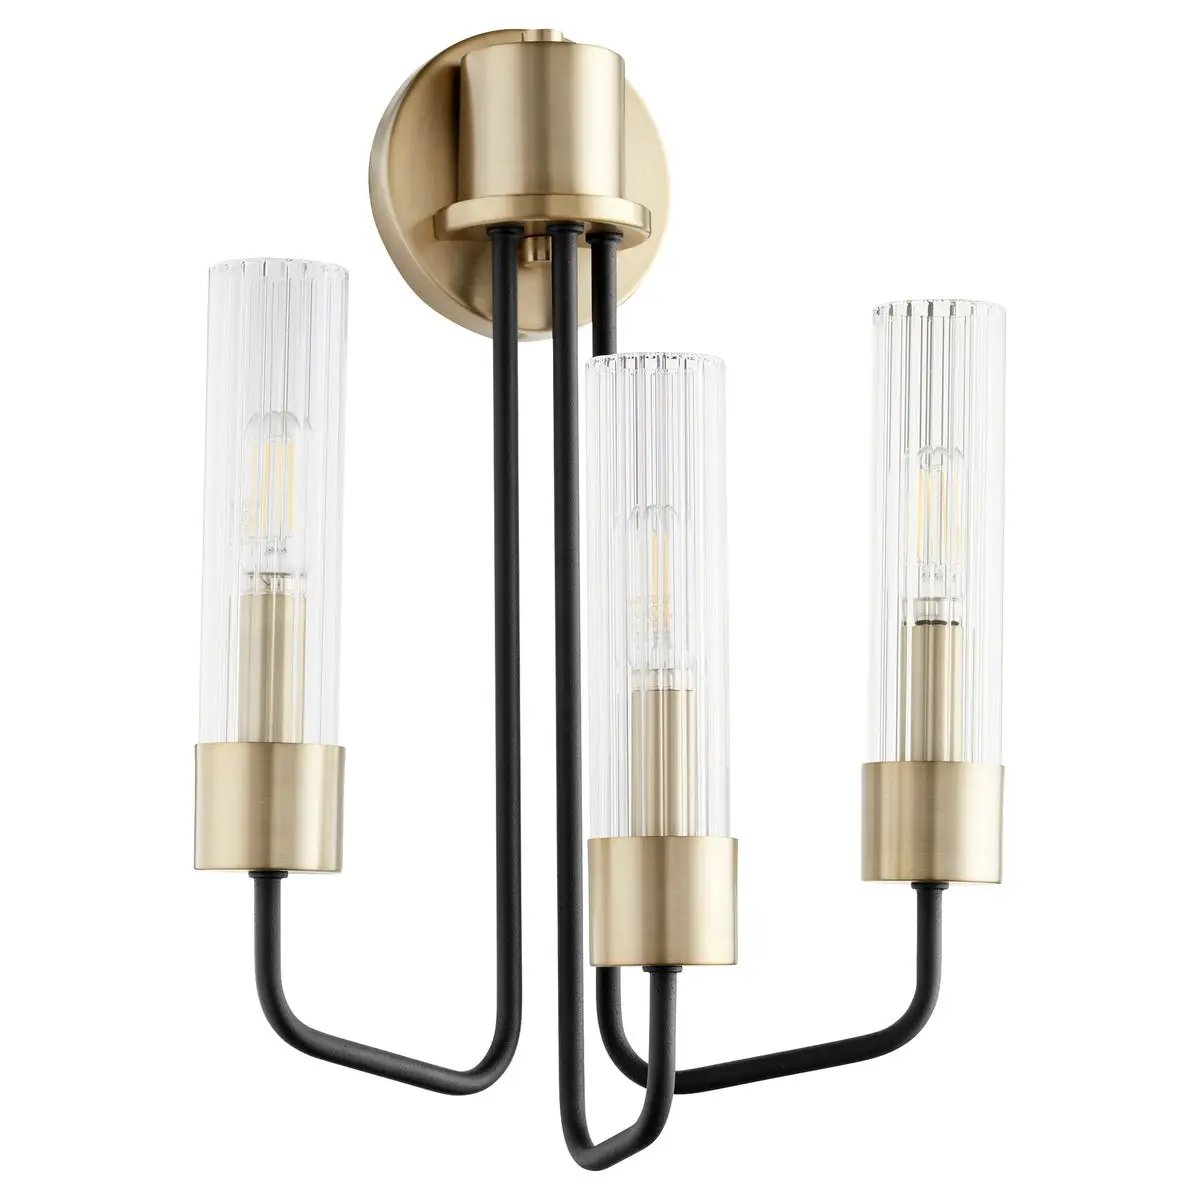 Transitional Wall Sconce with clear glass tubes, aged brass and noir finish. Linear frame with soft-angular curves. Suitable for indoor and outdoor spaces. 12"W x 18"H x 7"E.